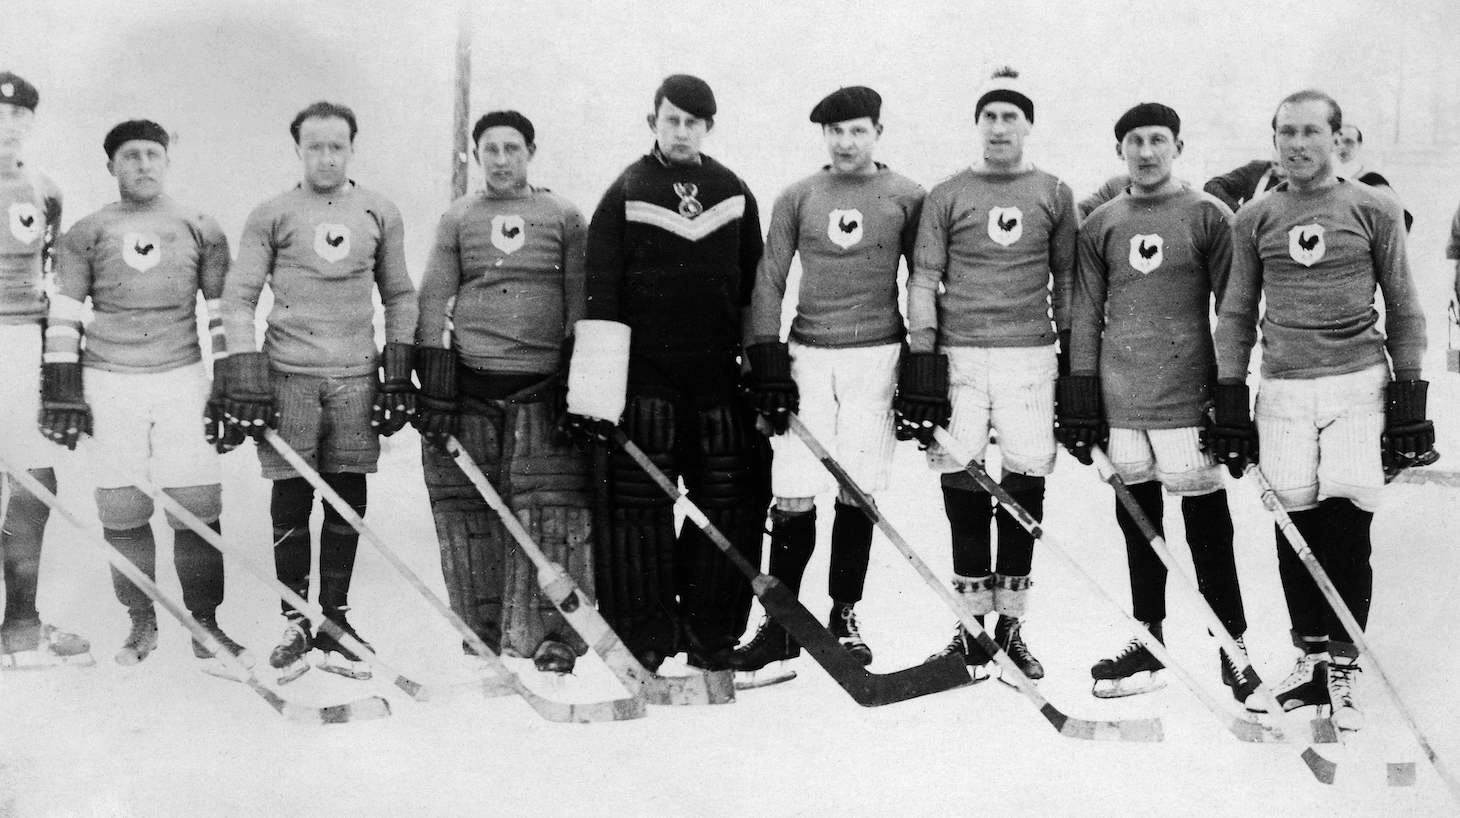 Picture taken in the 30s shows France's ice hockey players. (Photo by - / AFP) (Photo credit should read -/AFP via Getty Images)